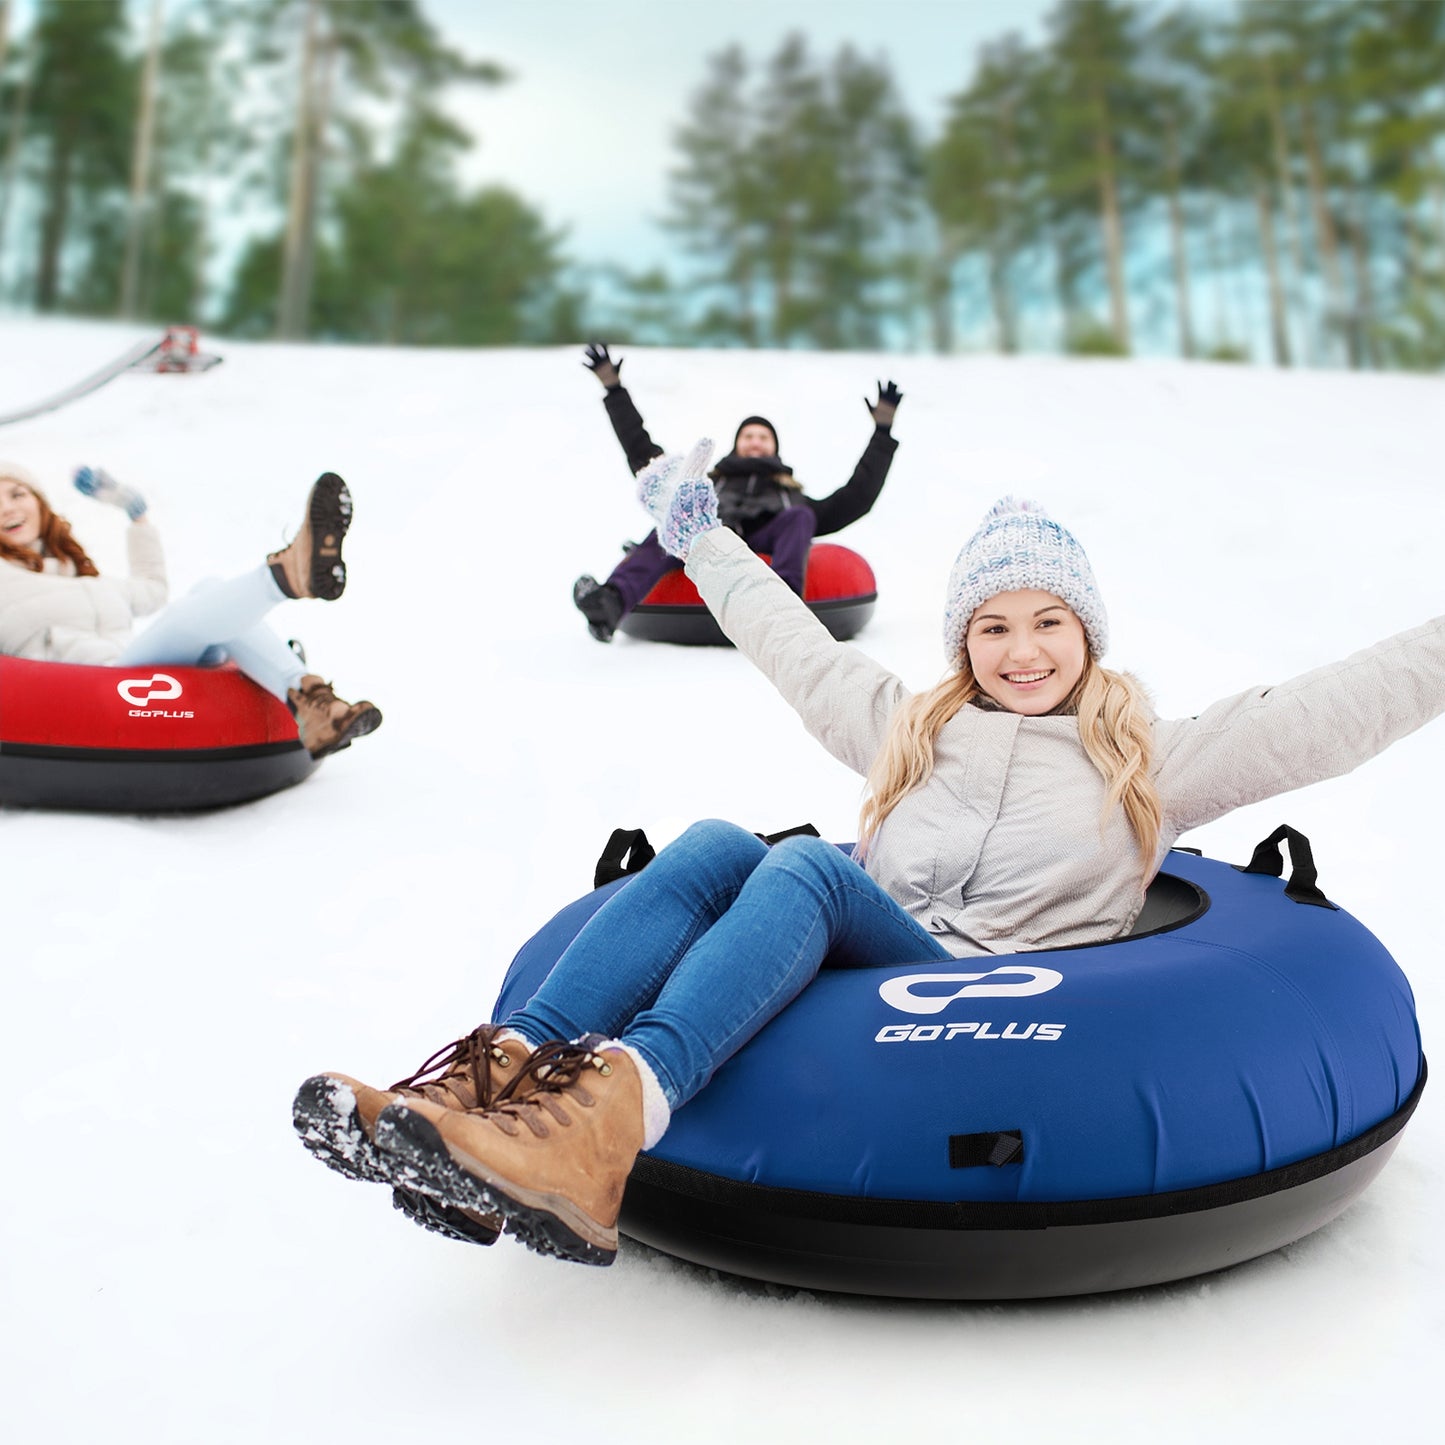 40" Inflatable Snow Sled for Kids and Adults-Blue